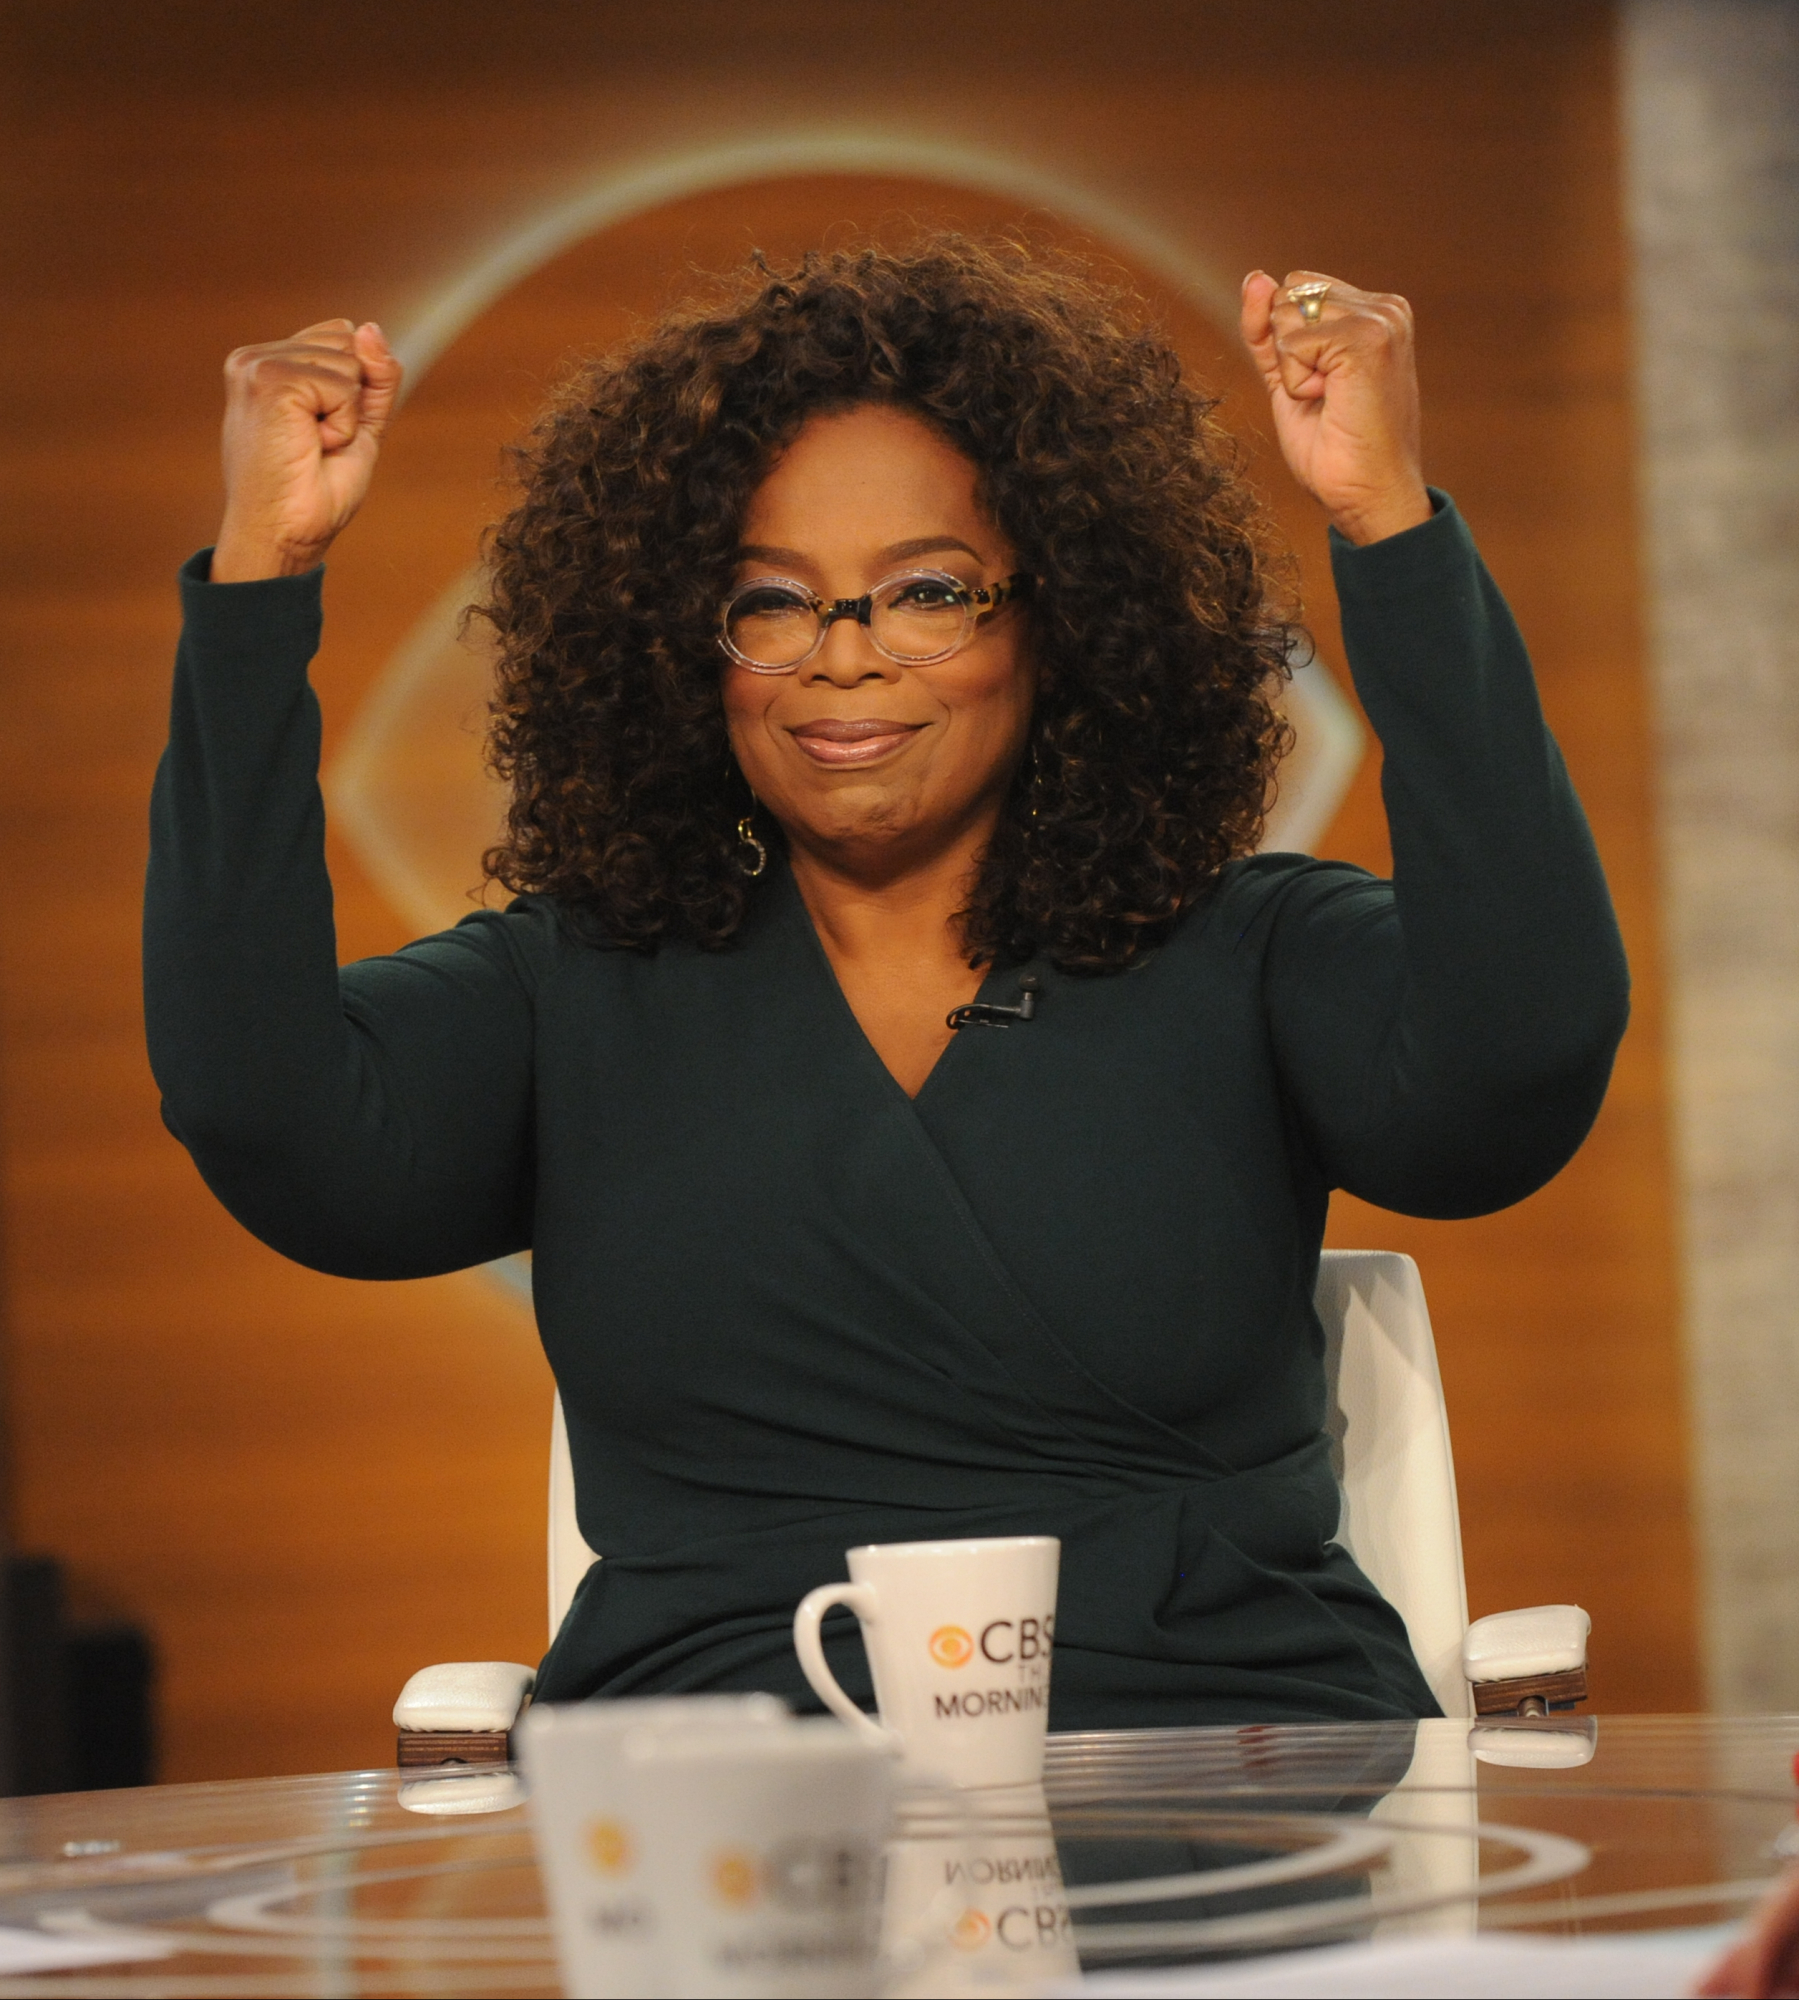 Oprah Winfrey visits CBS This Morning with Co-hosts Norah O'Donnell and Gayle King on Wednesday, Oct. 14, 2015. (Heather Wines—CBS/Getty Images)